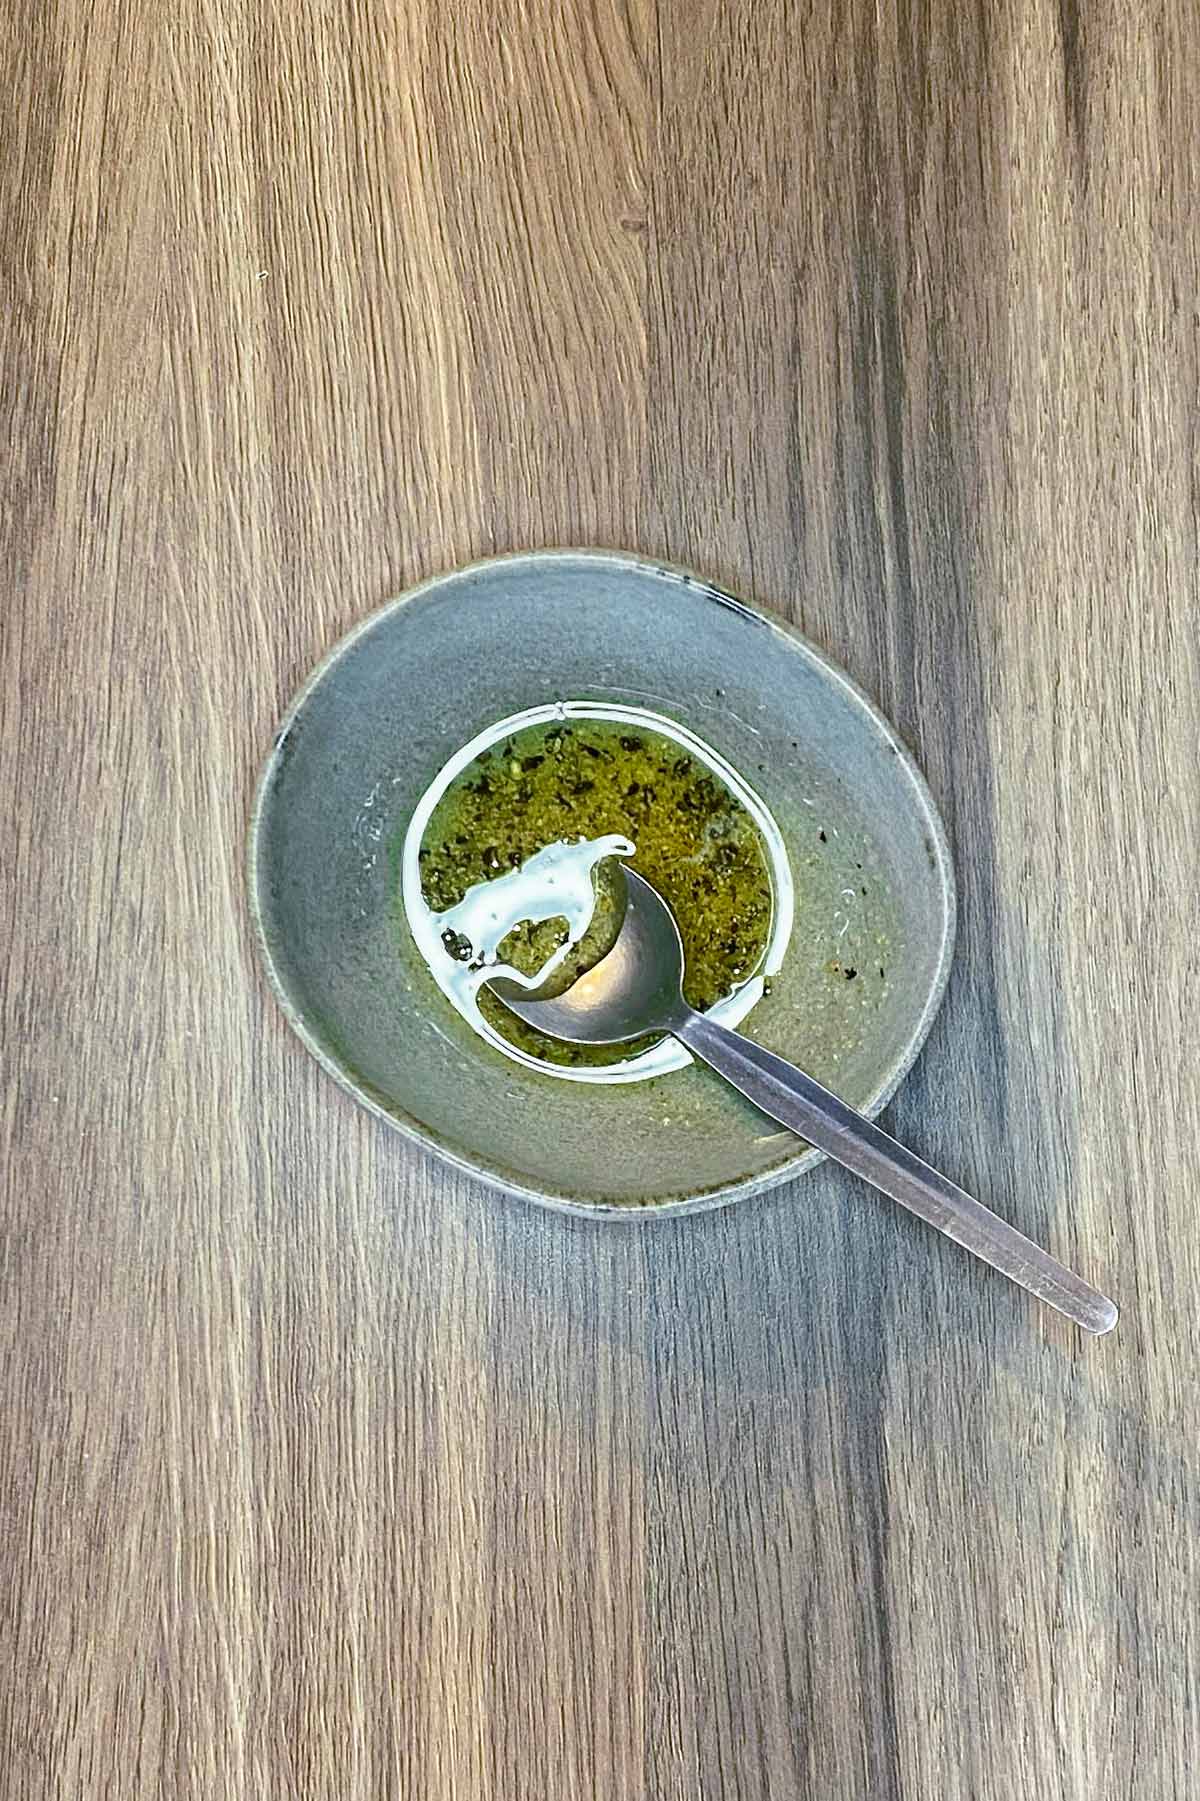 A small bowl of oil based dressing.